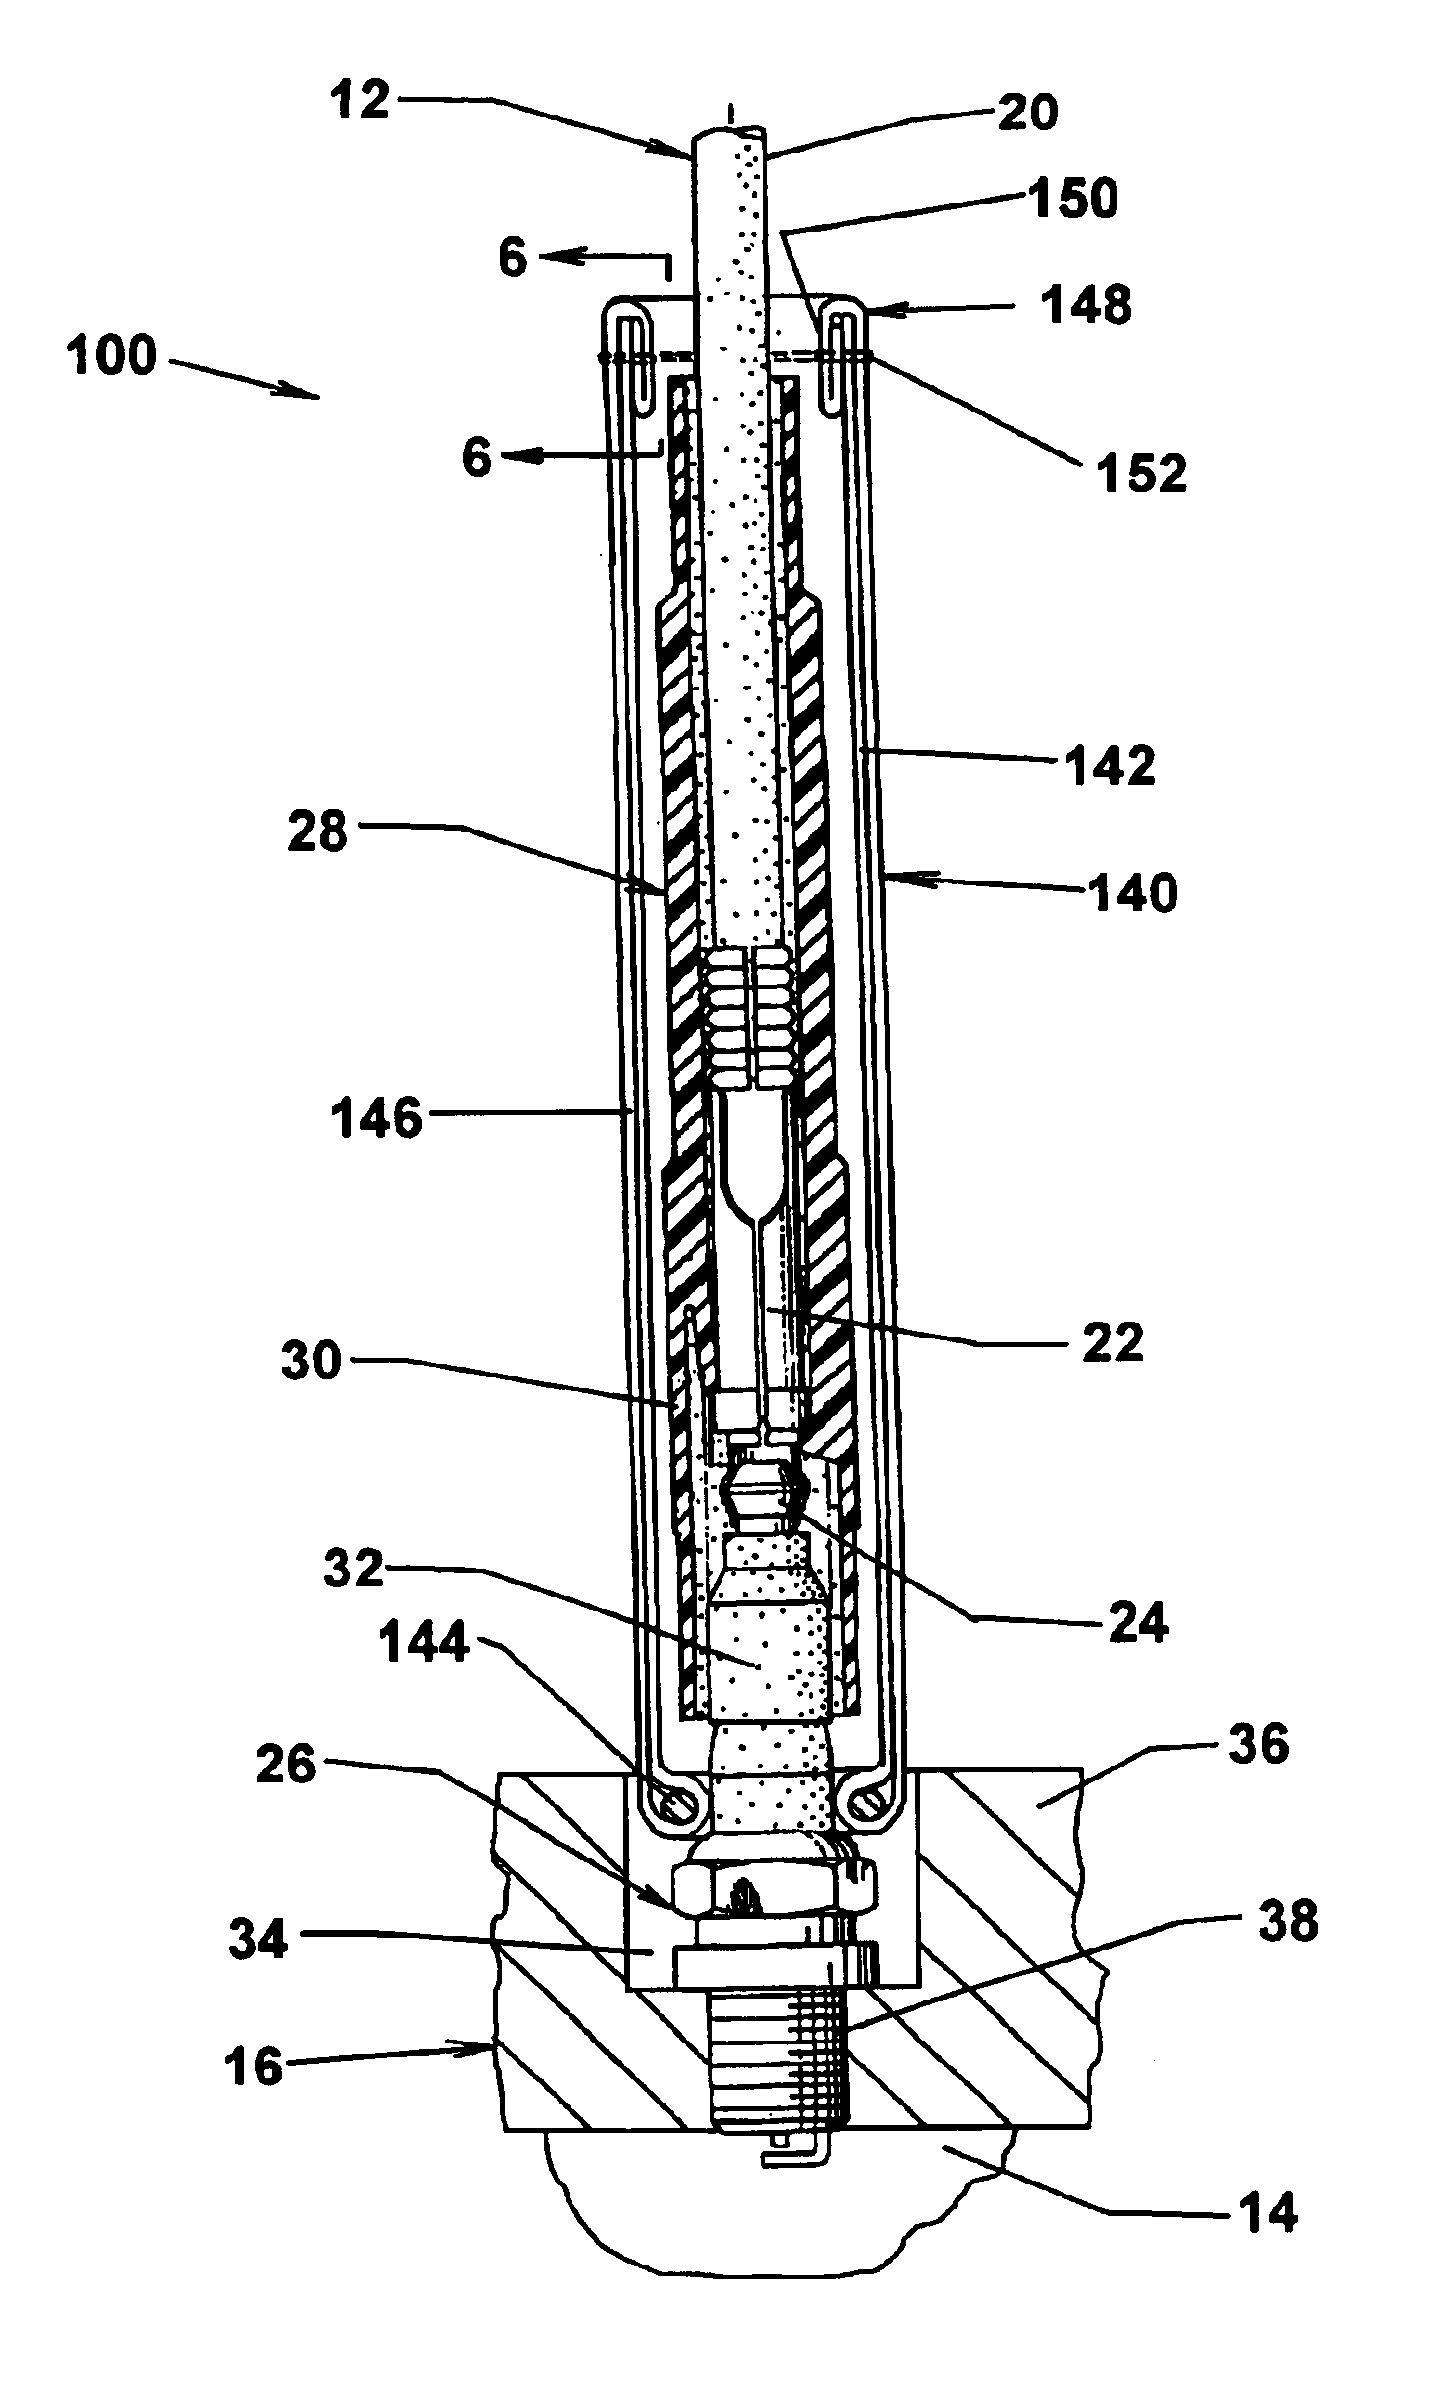 Cover for spark plug, ignition wire and boot